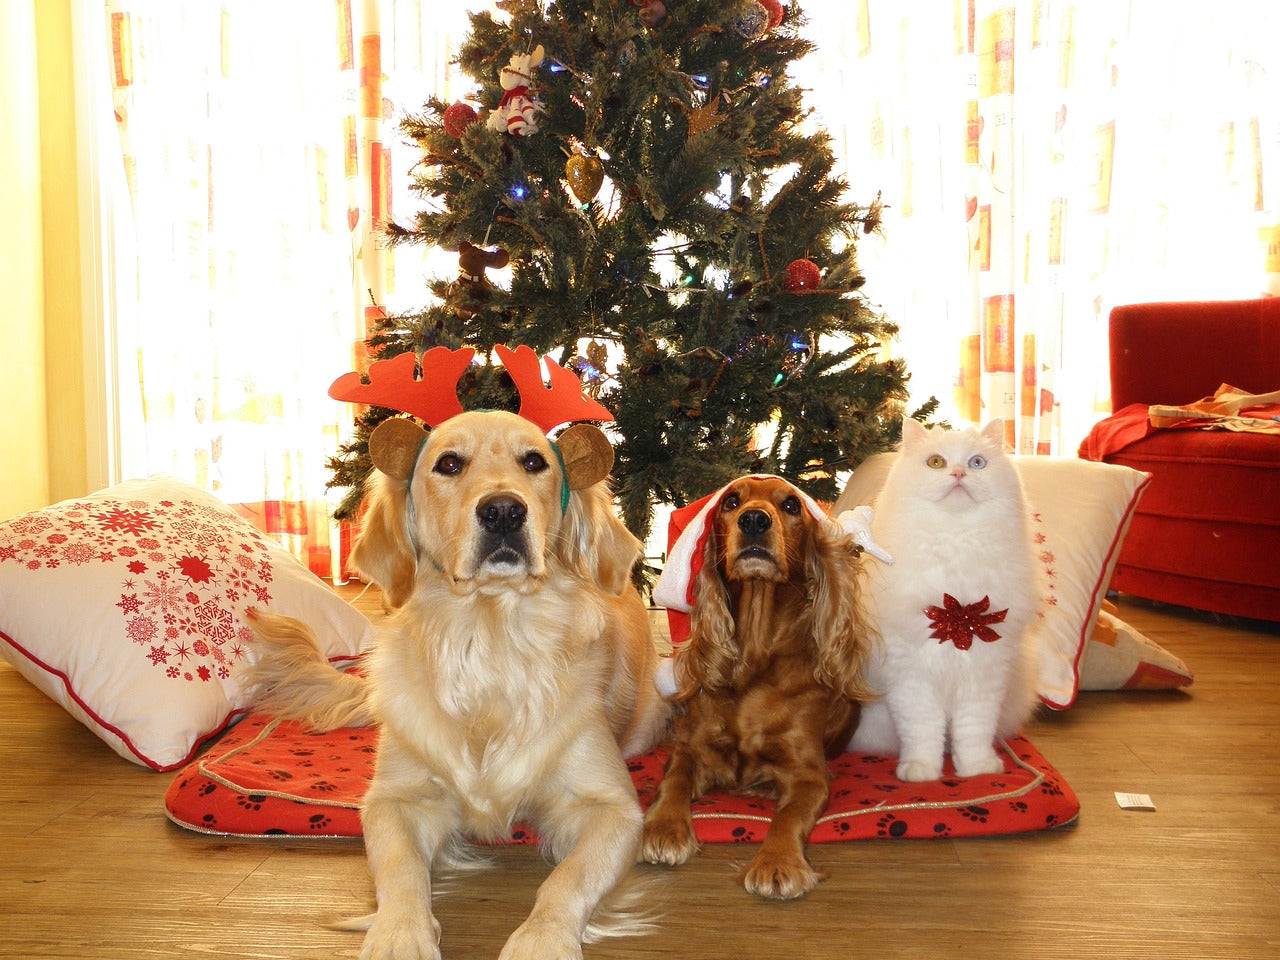 Santa Paws is Coming to Town: KindTail's Holiday Wishlist for Your Furry Friend